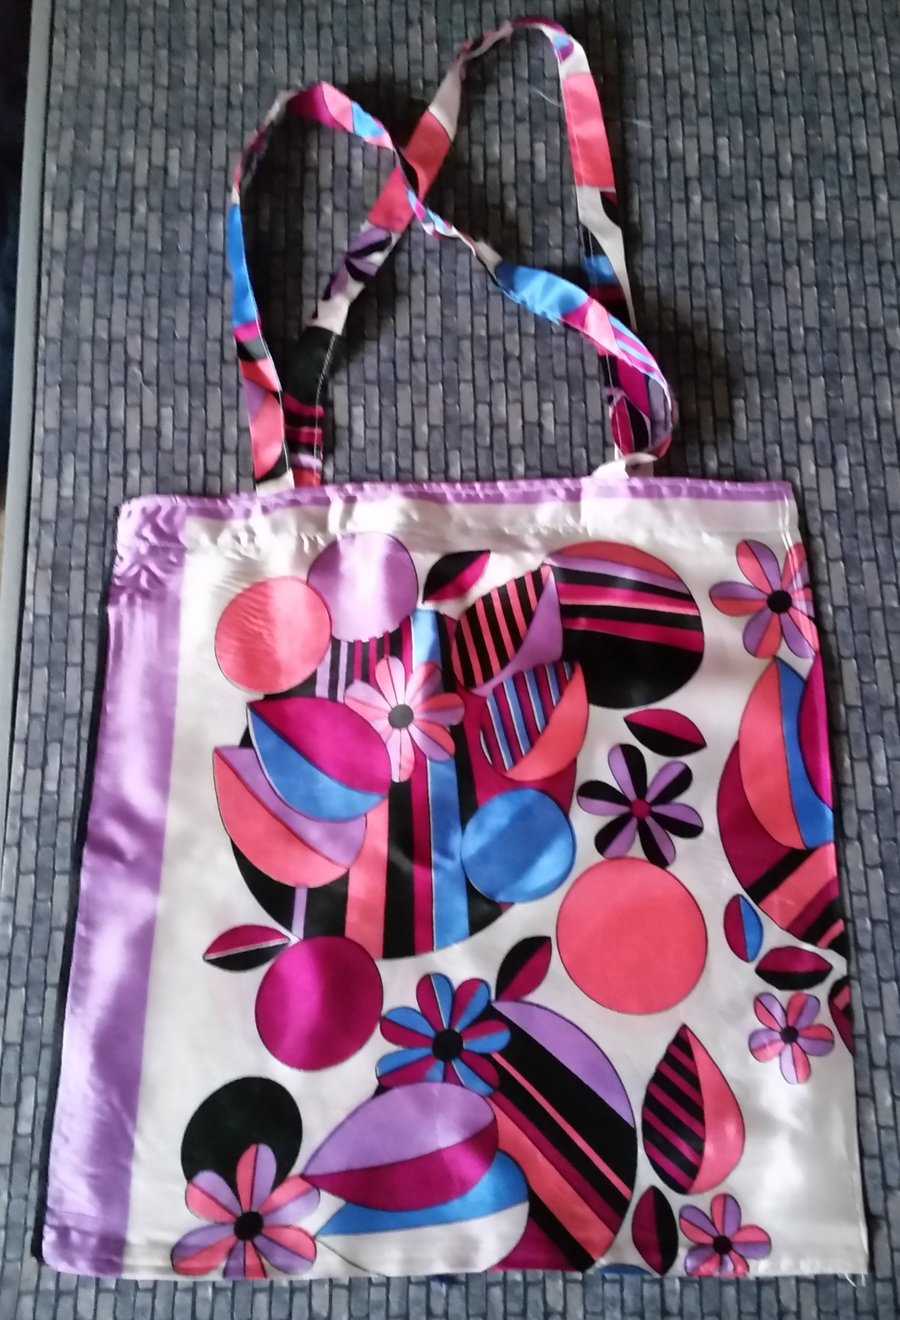 Vintage headscarf -  Shopping or Tote Bag - Colourful Print